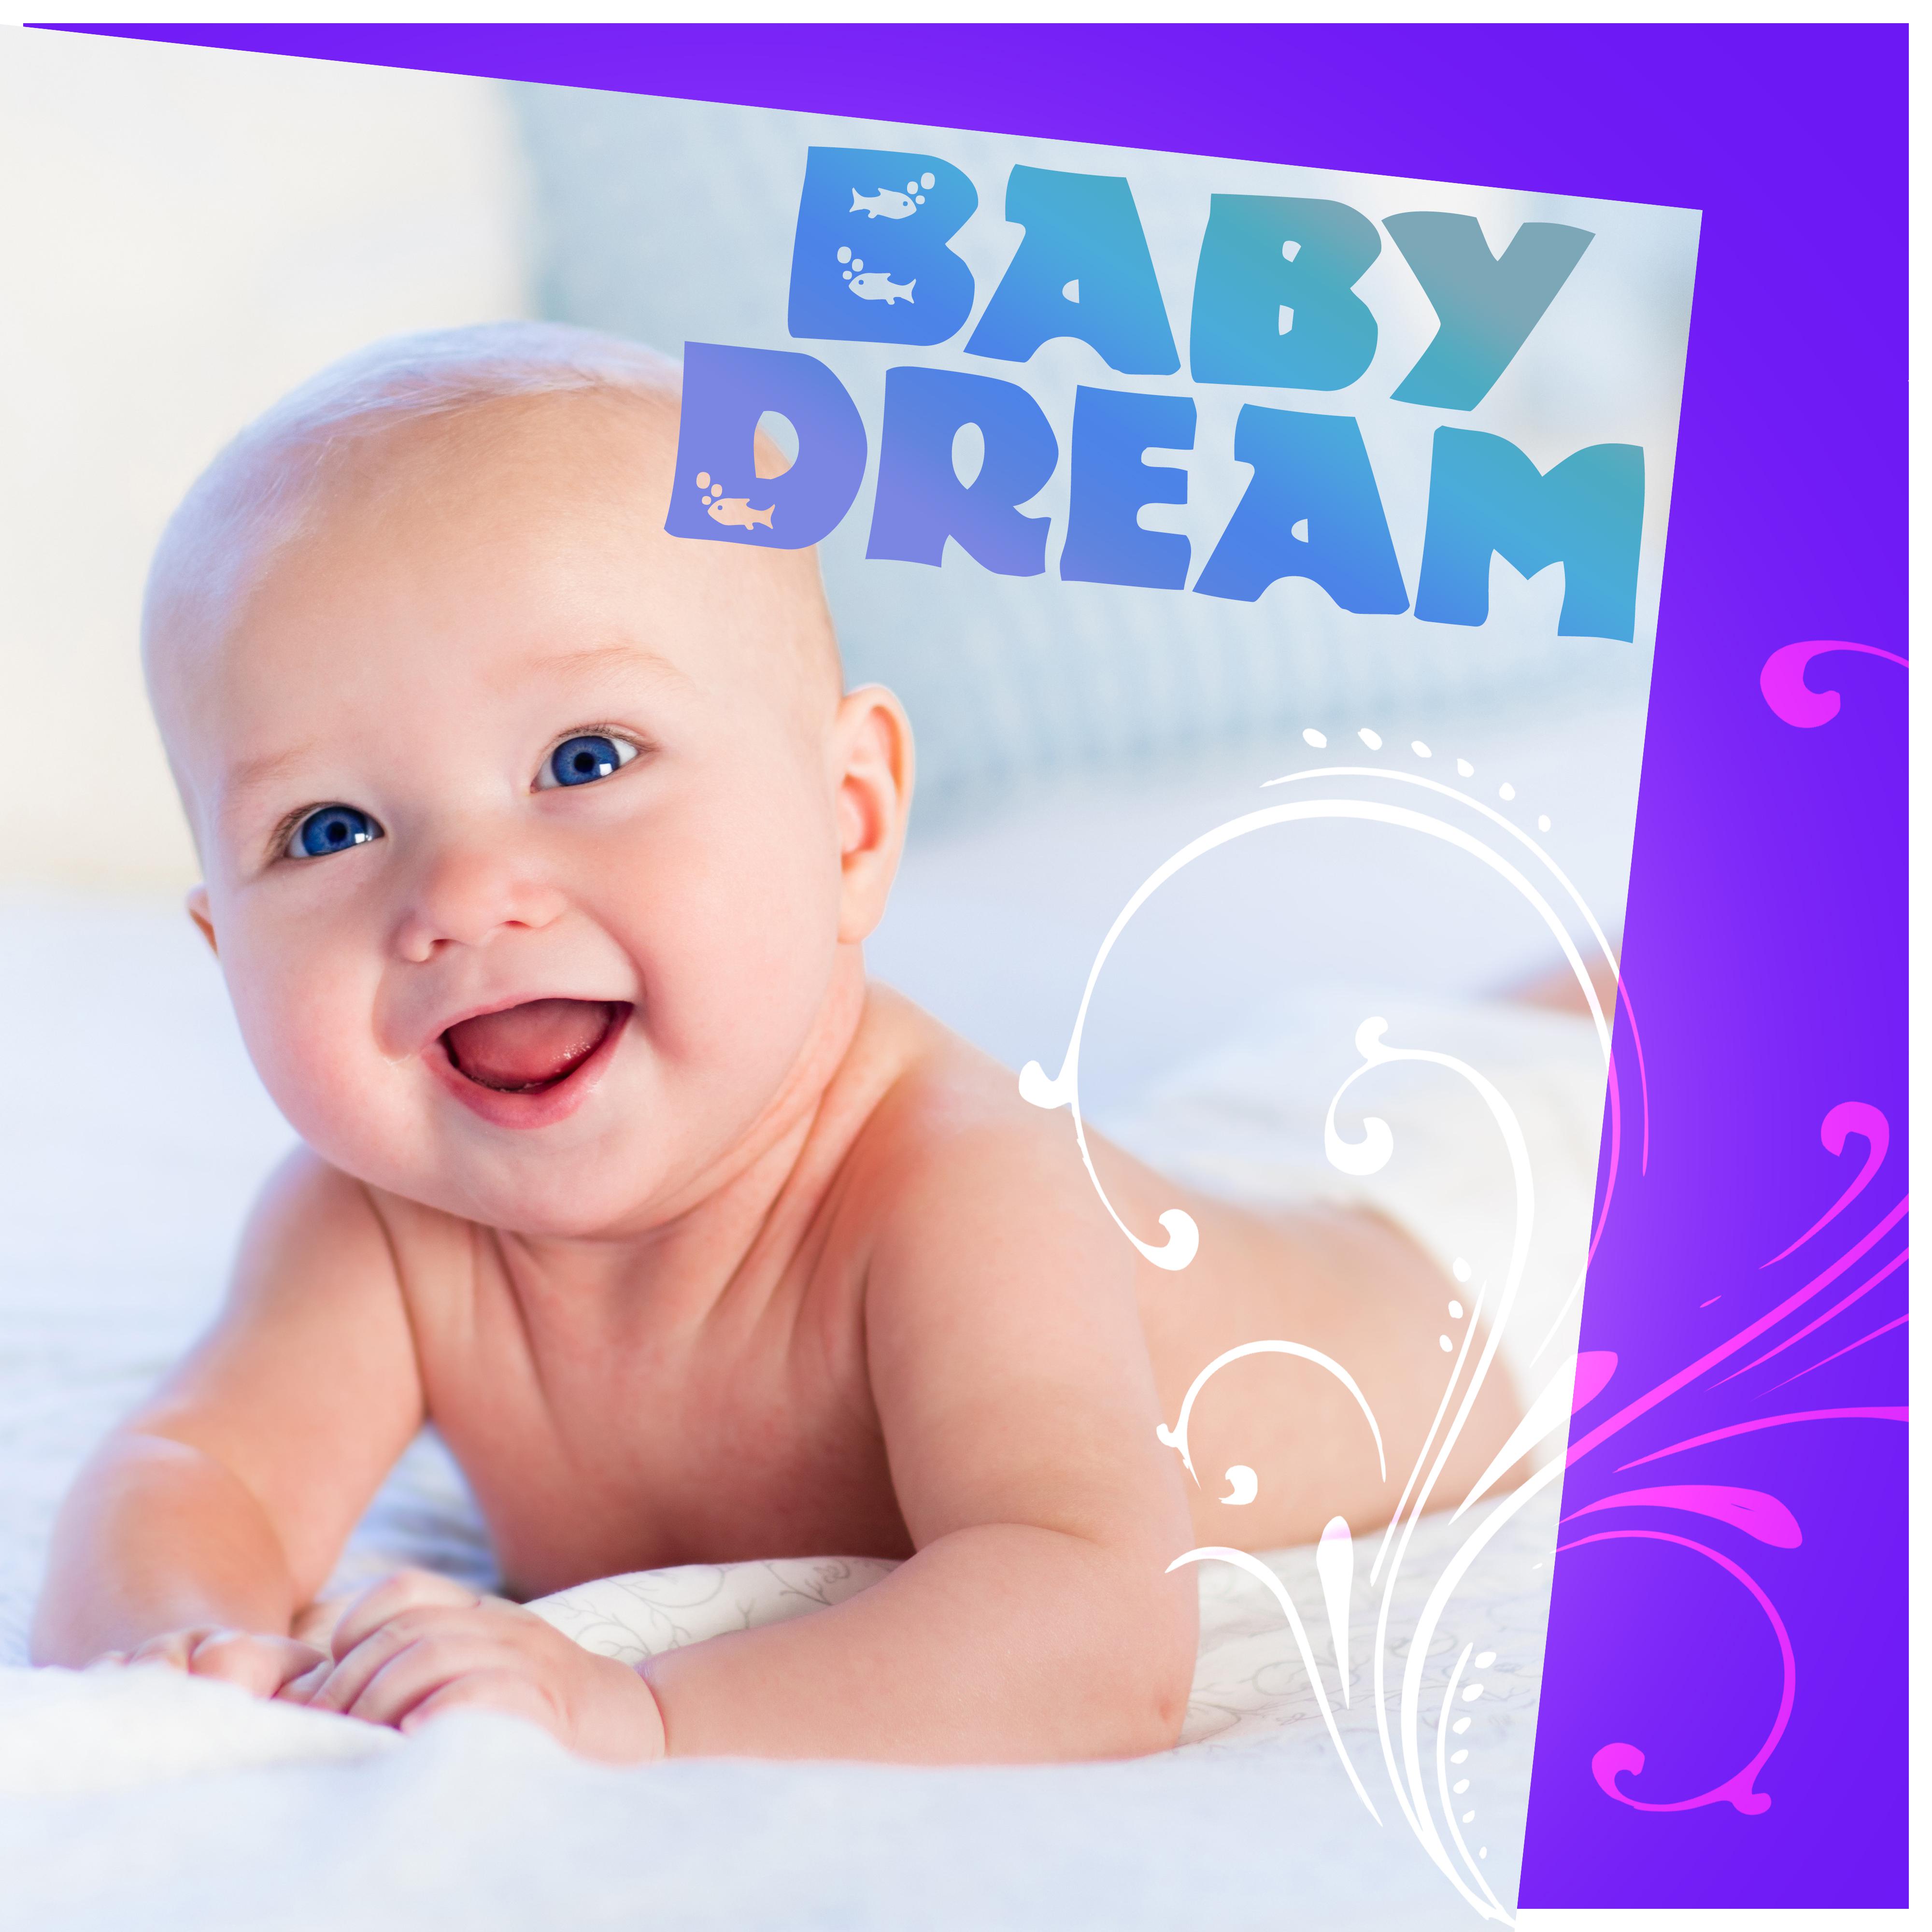 Baby Dream - Emotional Music, Lullaby Soothing Sounds, The Natural Music for Healthy Living, Hypnosis for Mom and Baby